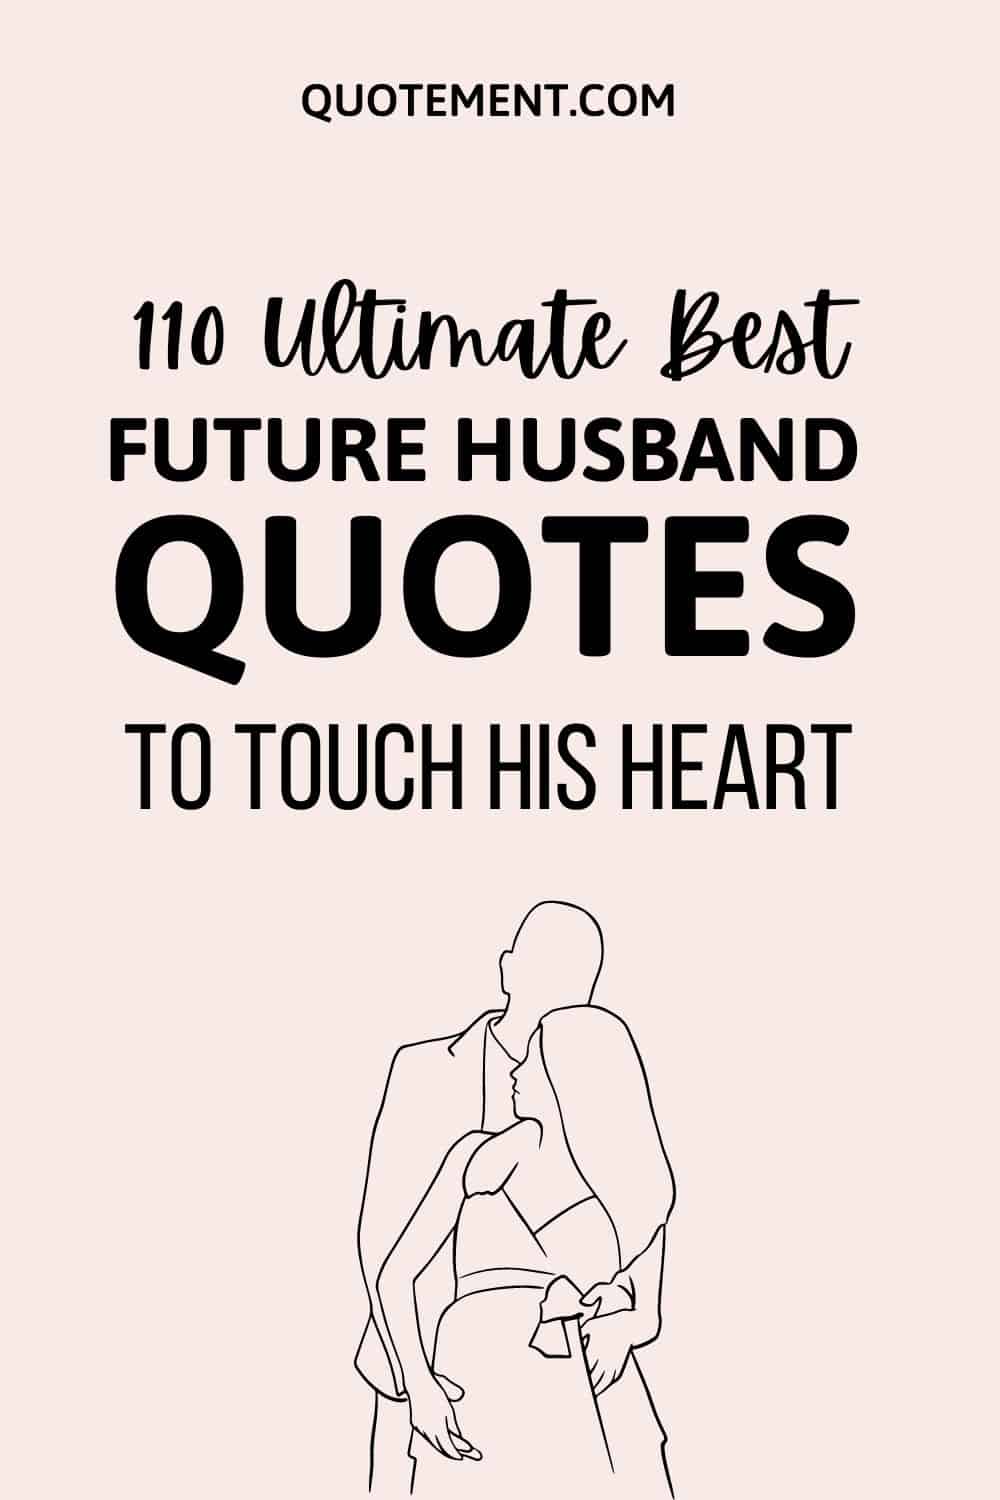 110 Ultimate Best Future Husband Quotes To Touch His Heart